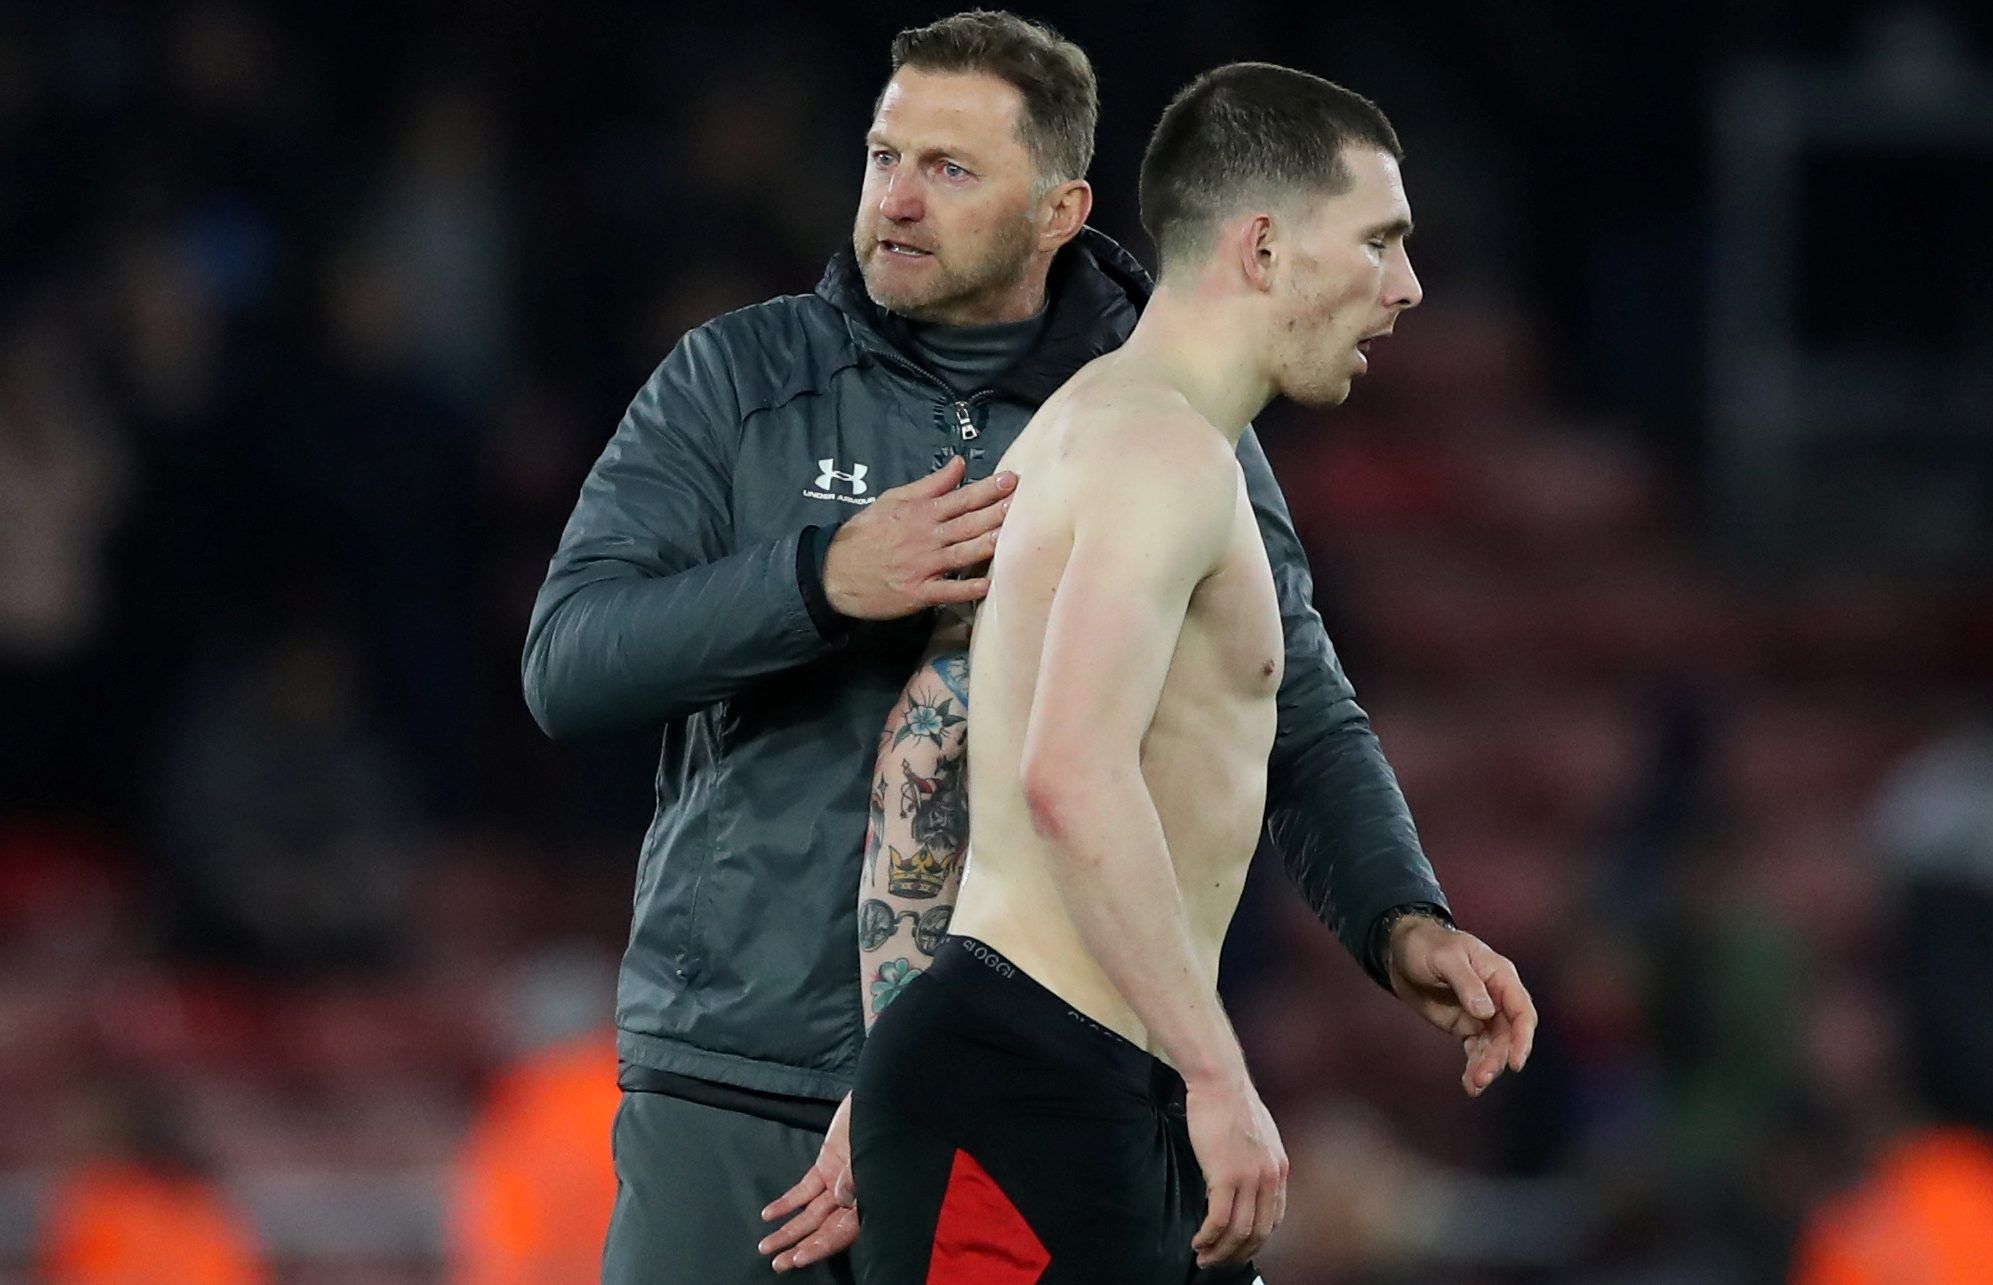 Soccer Football - Premier League - Southampton v Crystal Palace - St Mary's Stadium, Southampton, Britain - December 28, 2019  Southampton manager Ralph Hasenhuttl with Pierre-Emile Hojbjerg after the match   Action Images via Reuters/Peter Cziborra  EDITORIAL USE ONLY. No use with unauthorized audio, video, data, fixture lists, club/league logos or 